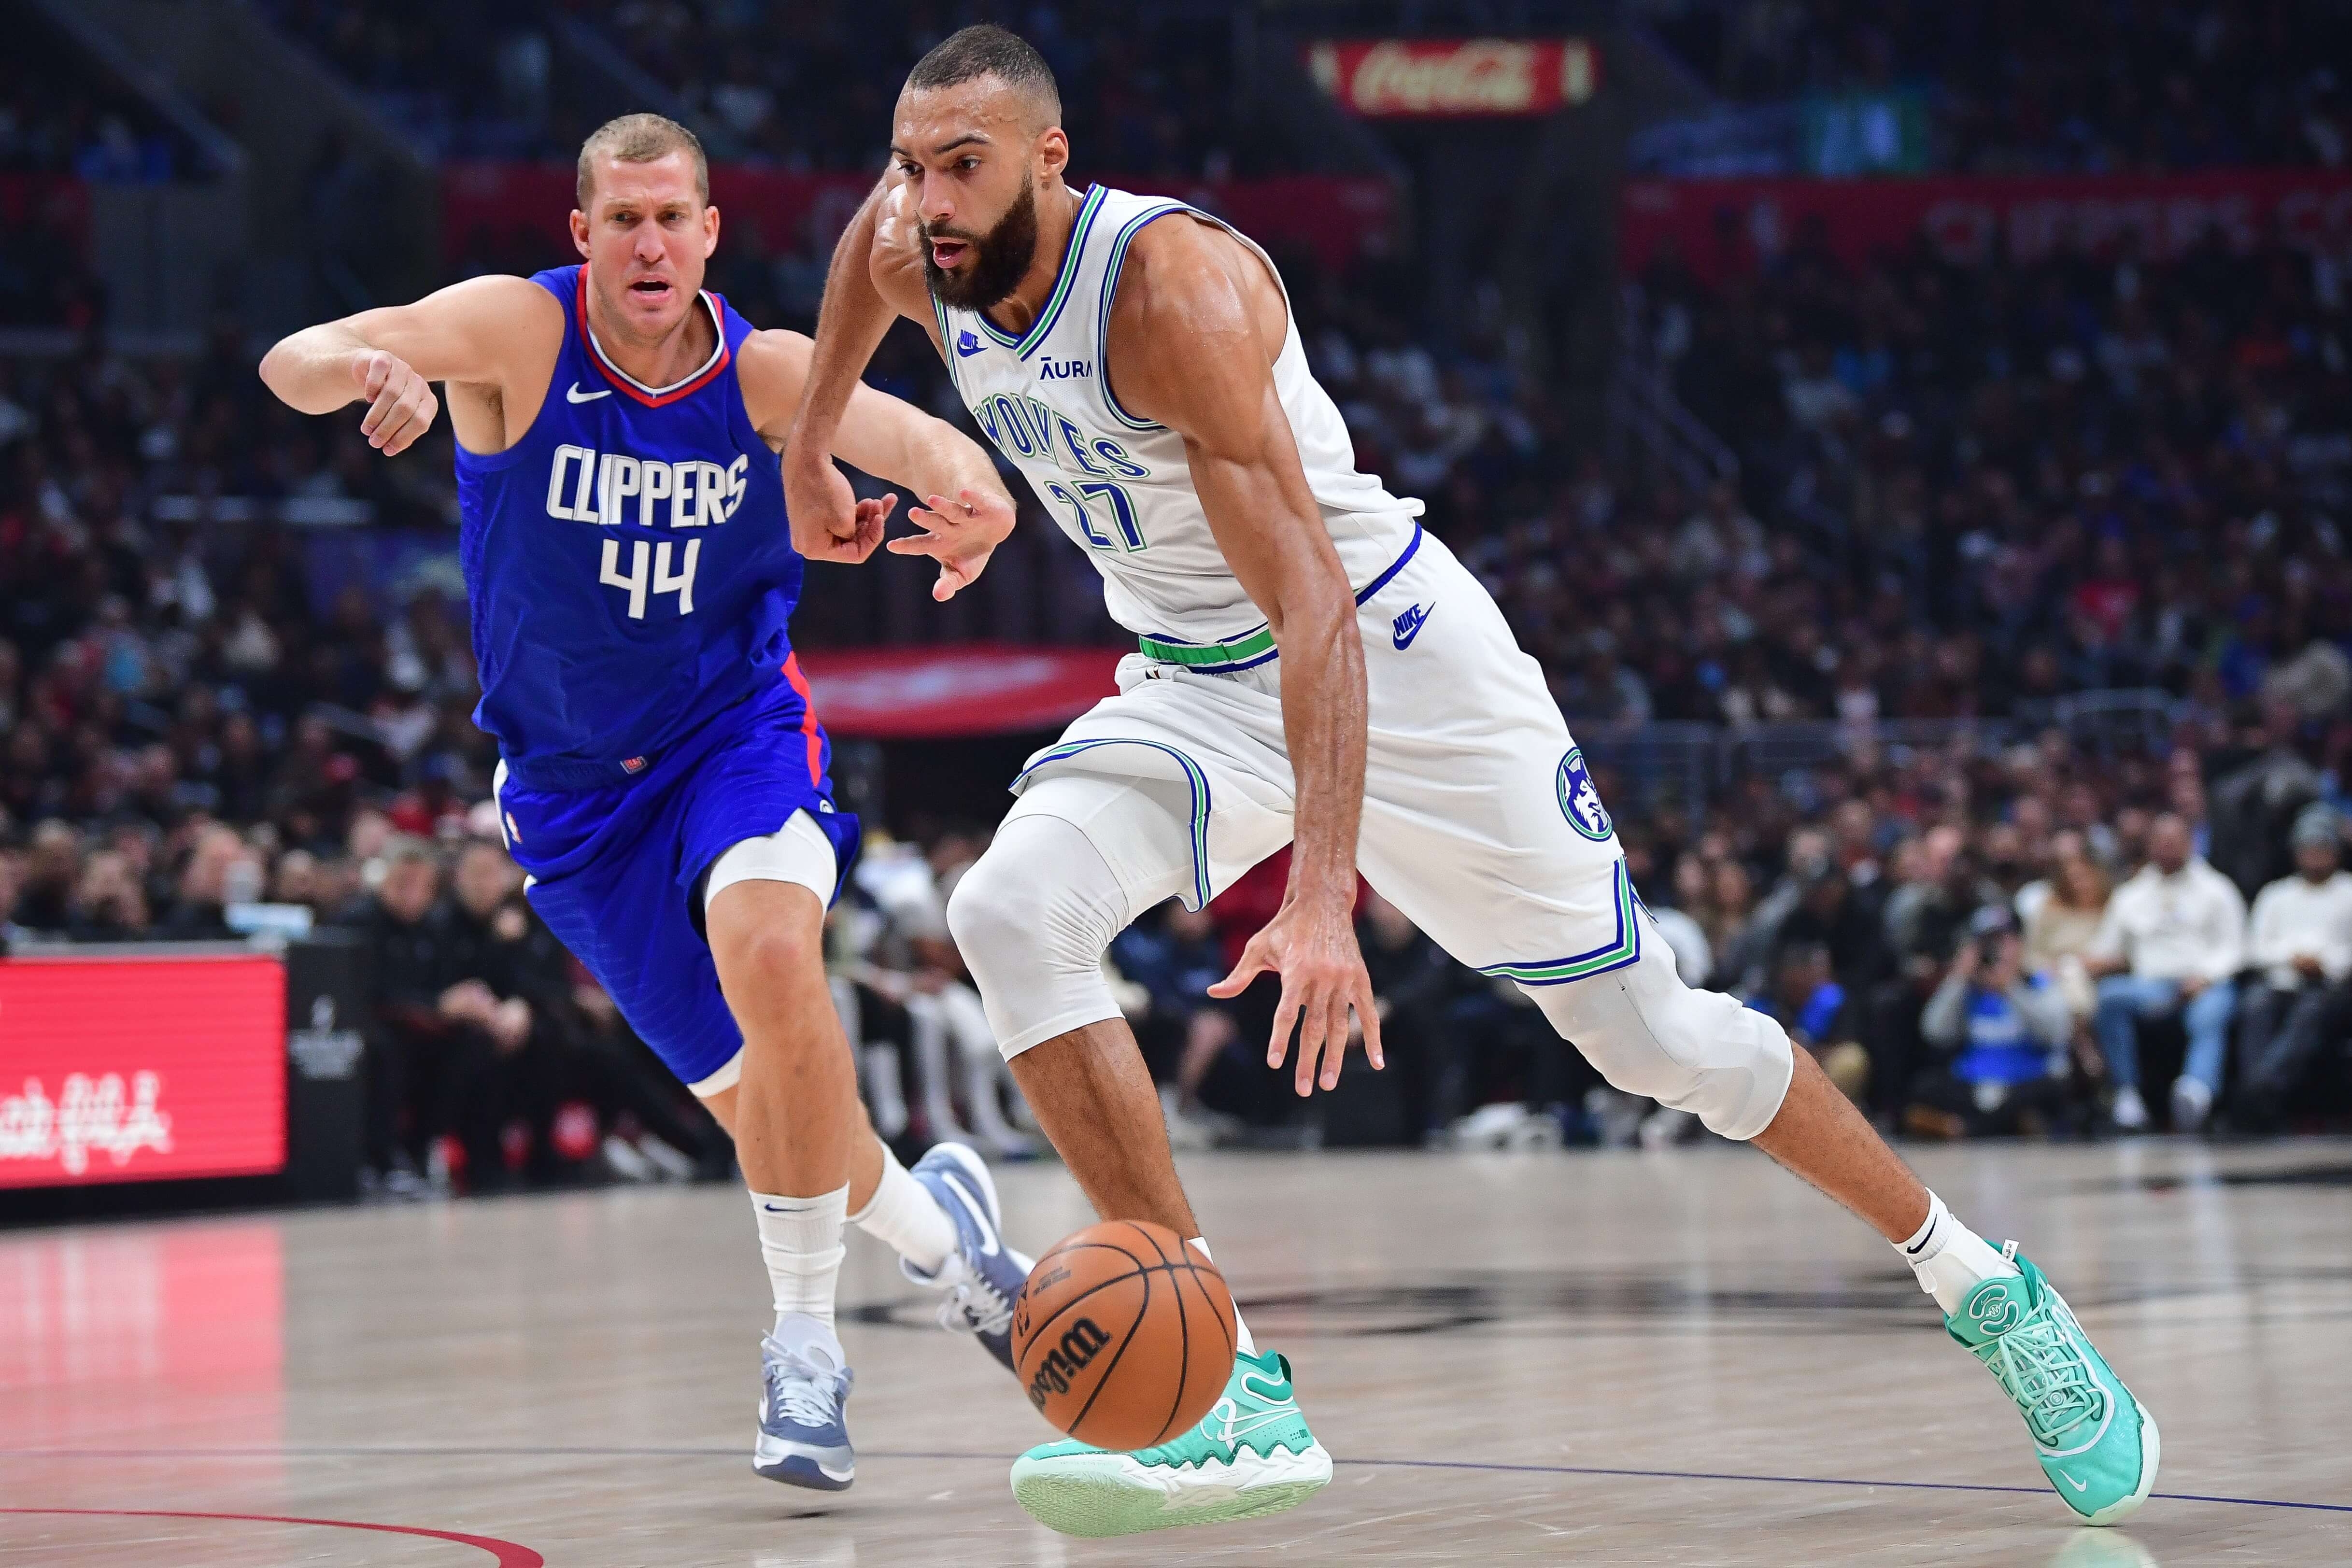 Kings vs Timberwolves Odds, Picks, and Predictions Tonight: Gobert Conquers Kings on Both Ends of the Floor